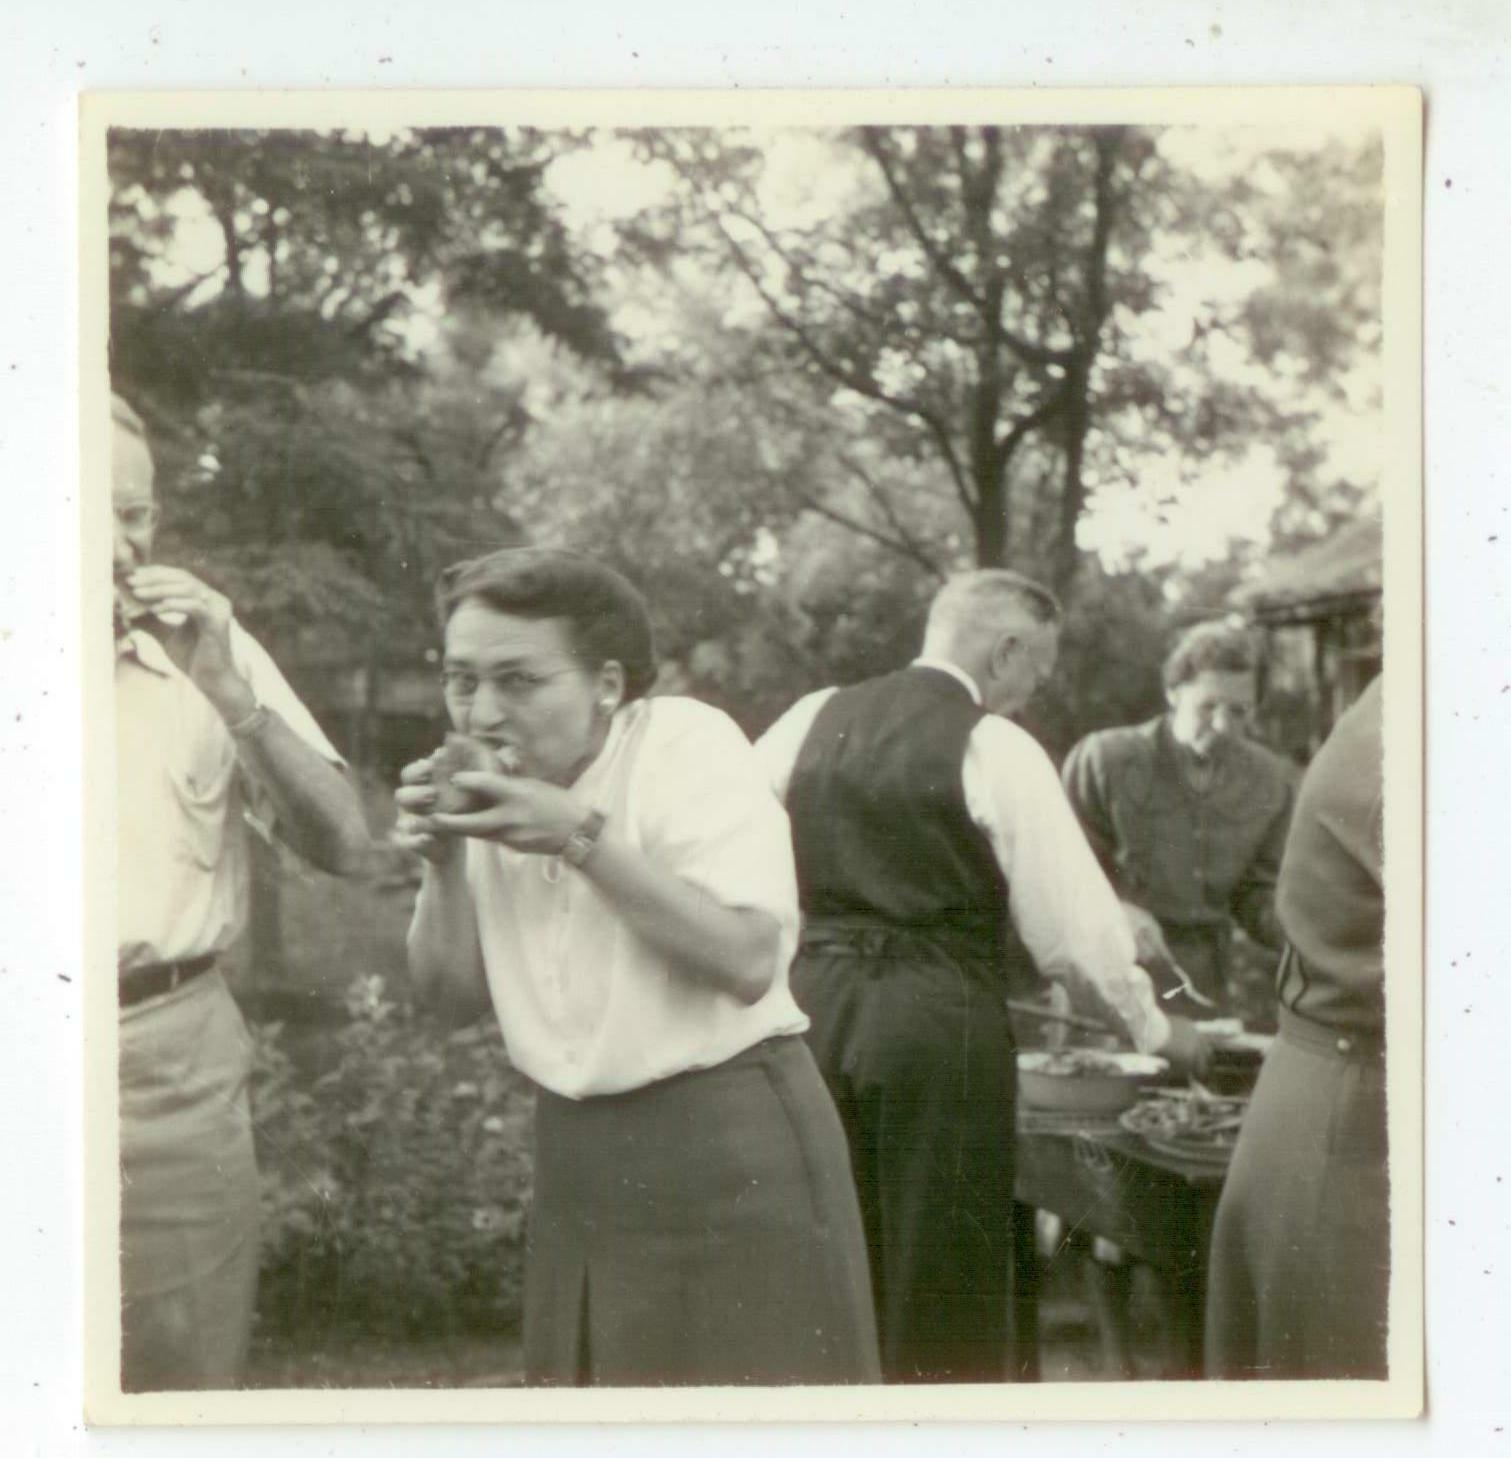 c1940s China photo from missionary collection - missionaries eating on picnic